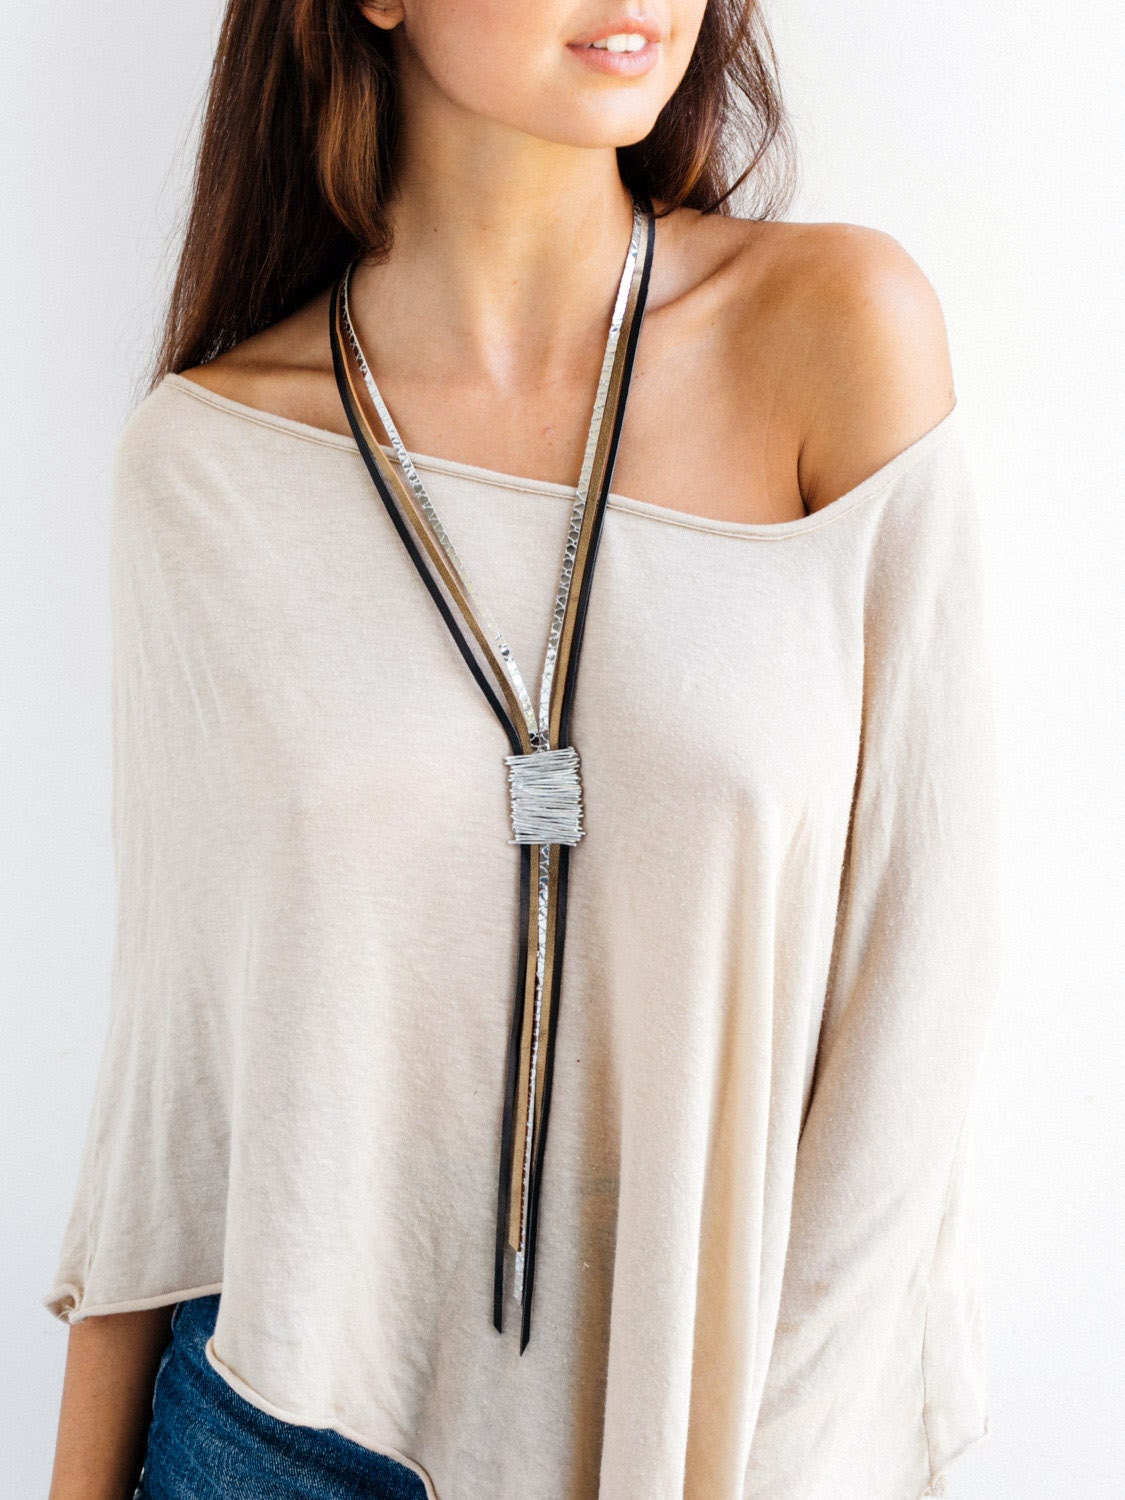 Statement Necklace Leather Necklace Long Necklace Wrapped